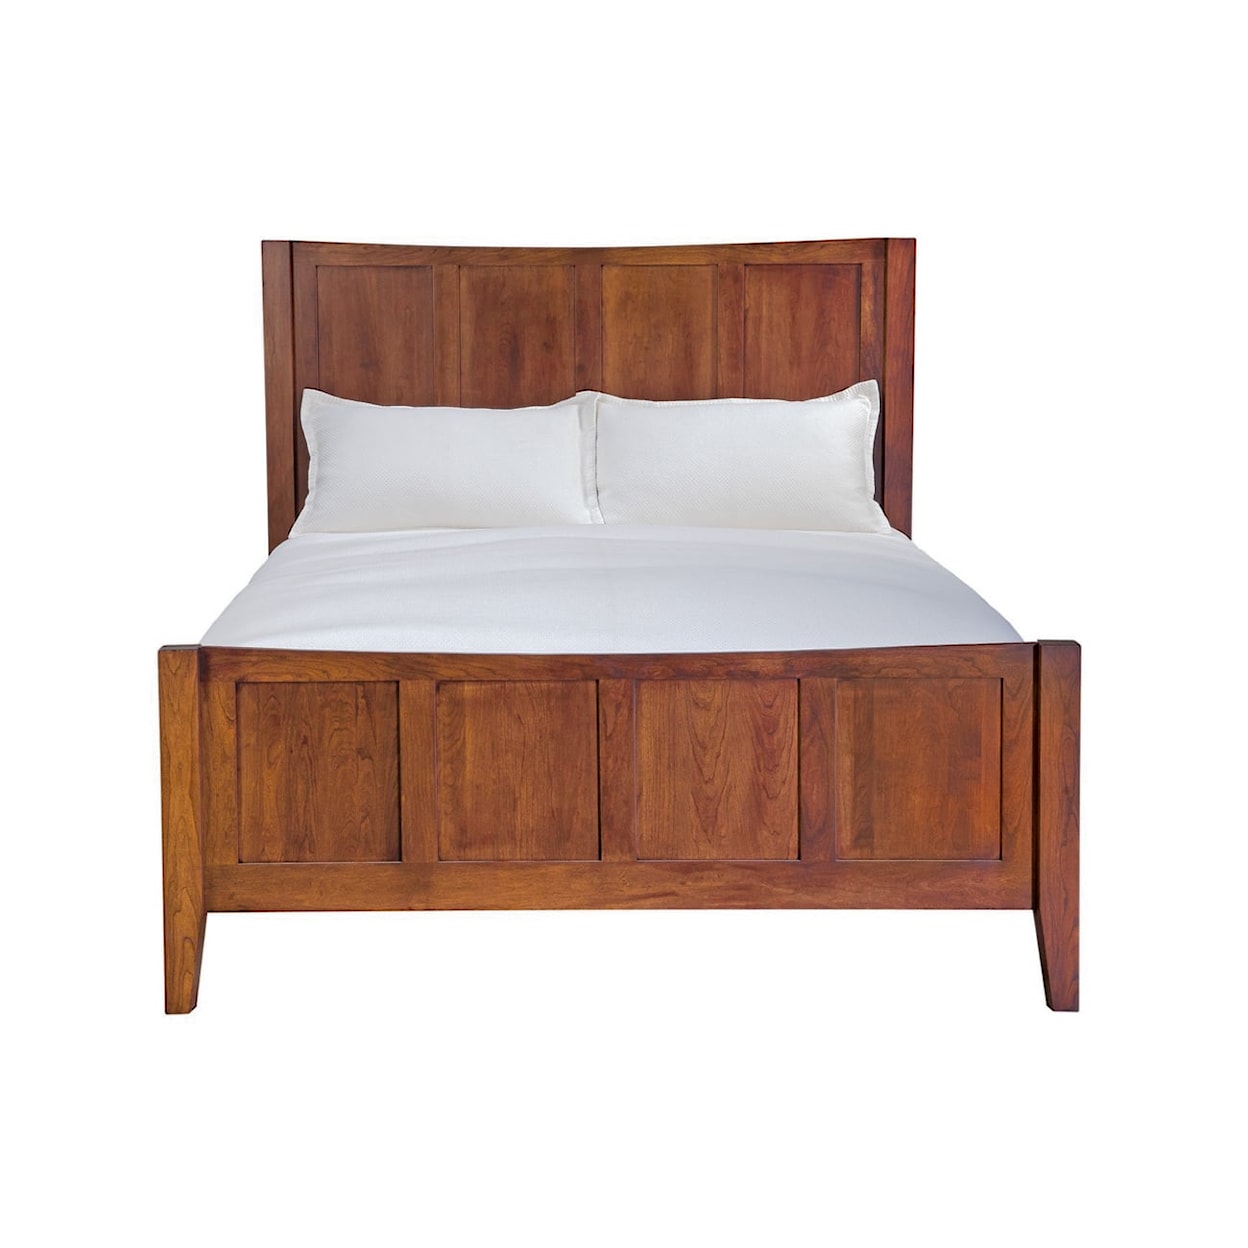 Mavin Atwood Group Atwood Queen Low Footboard Panel Bed